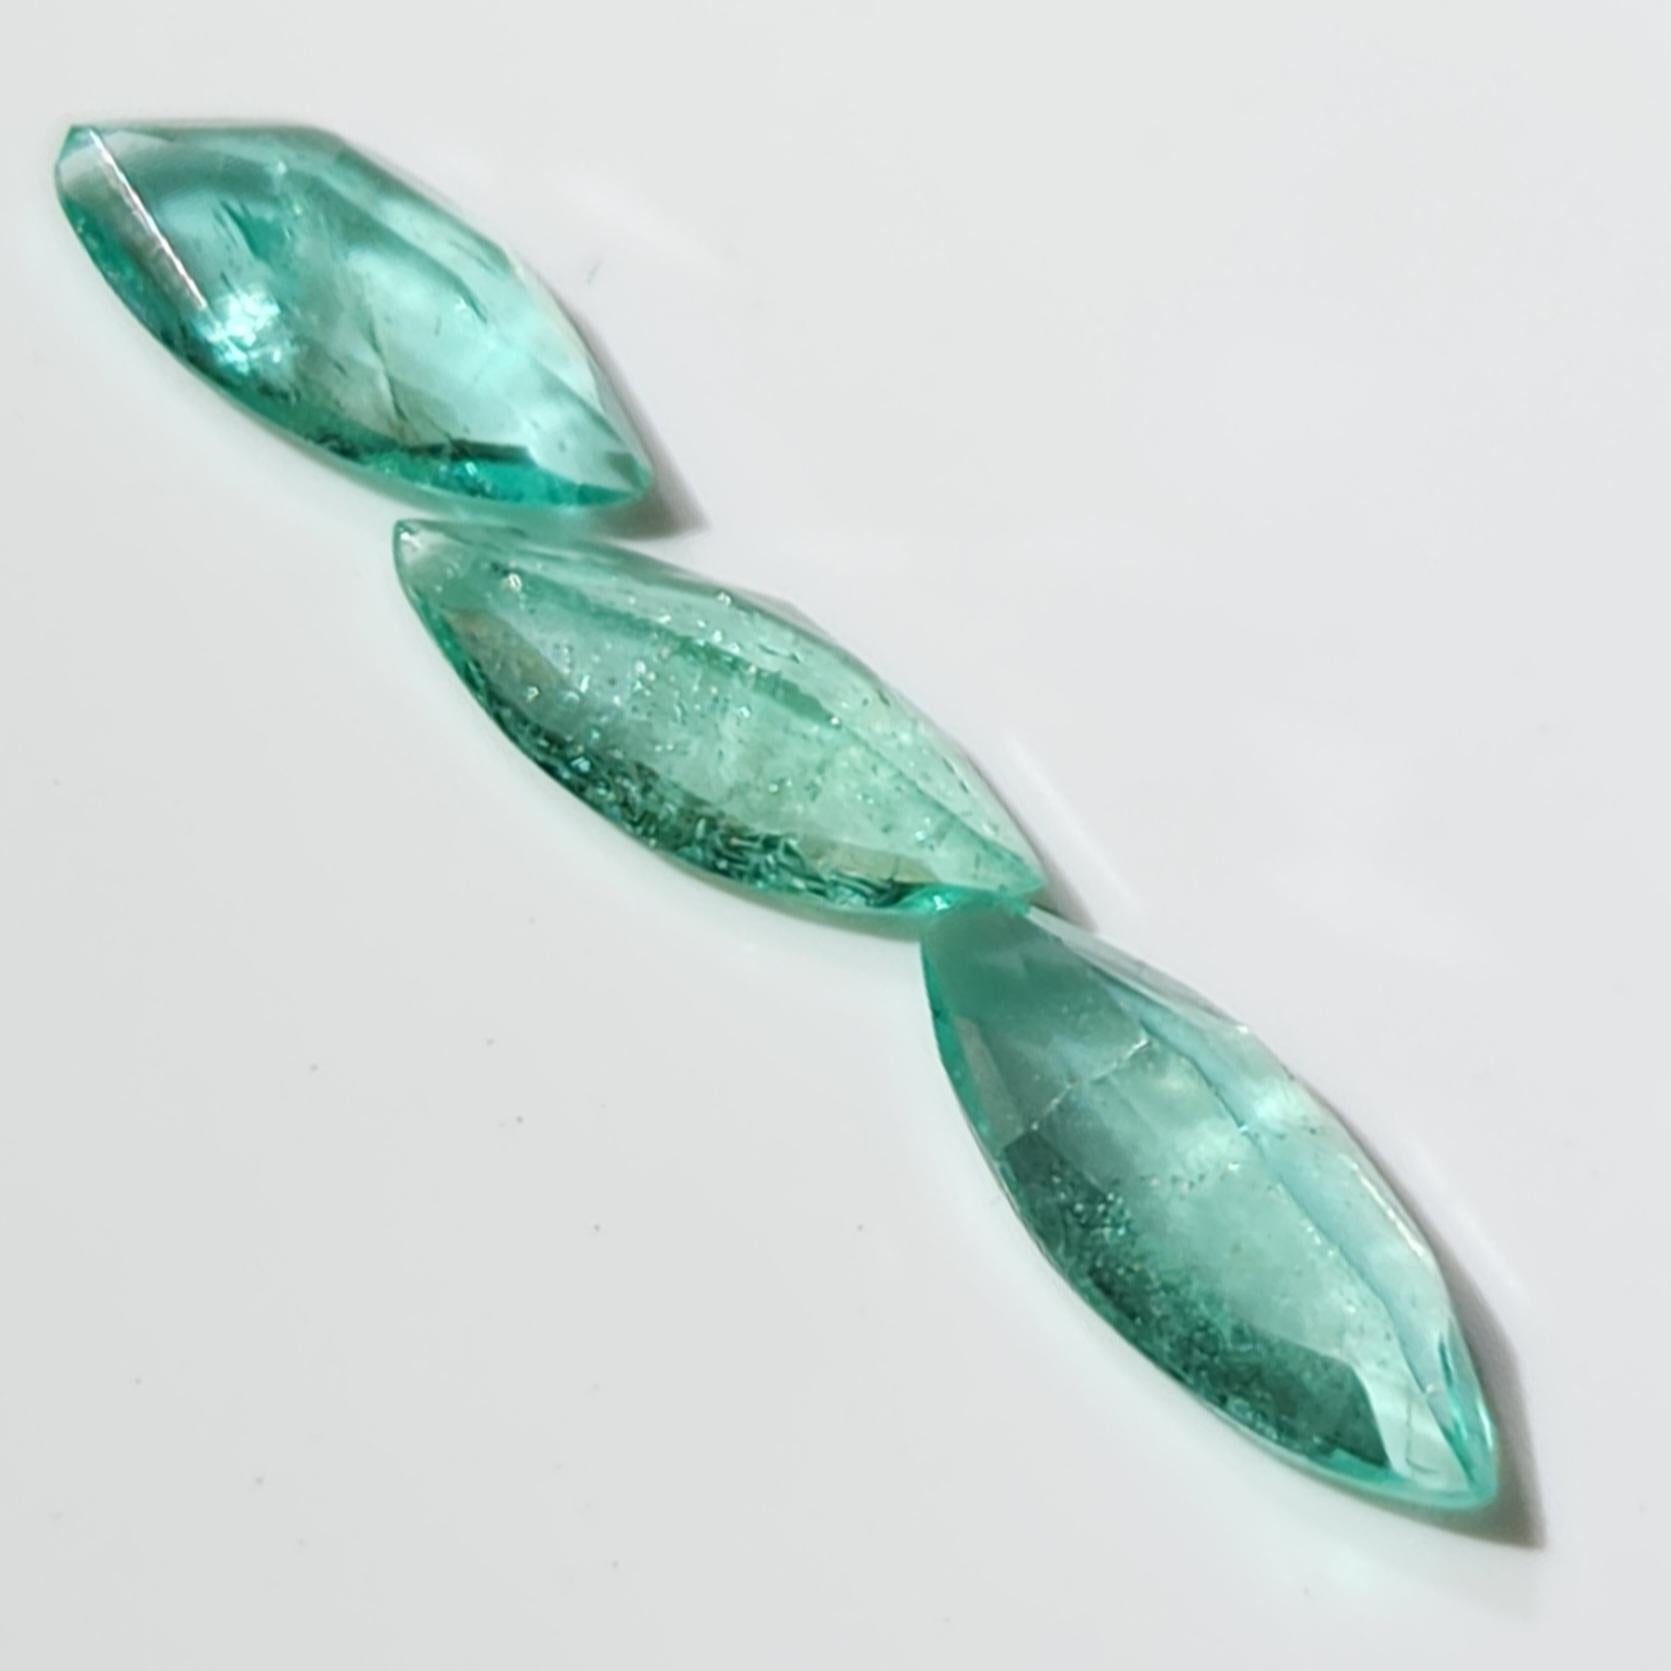 Captivating 0.82ct Loose Marquise Shape Colombian Emerald Gemstone

Product Description:

Behold our breathtaking 0.82ct loose Marquise Shape Colombian Emerald gemstone—a harmonious marriage of South American origin and nature's sublime artistry.